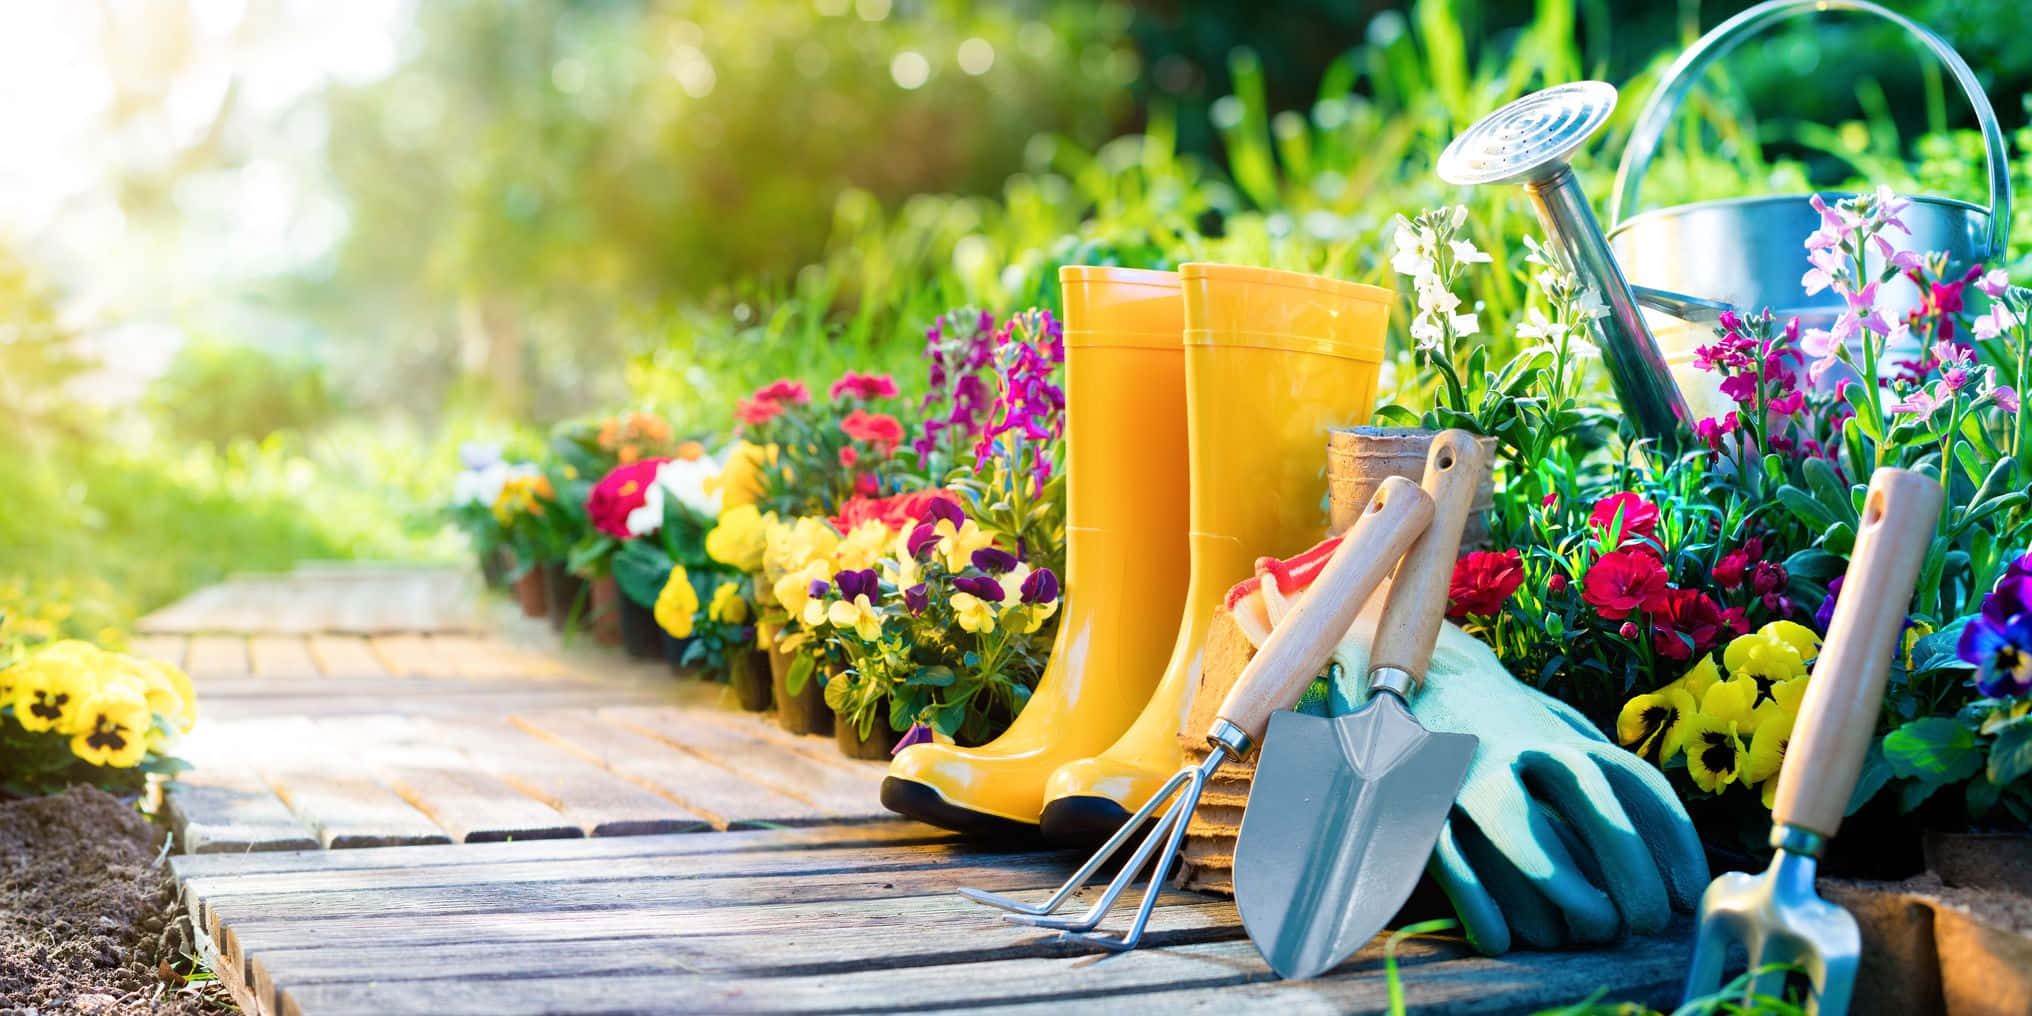 Bring the beauty of nature to your home by starting a gardening project.